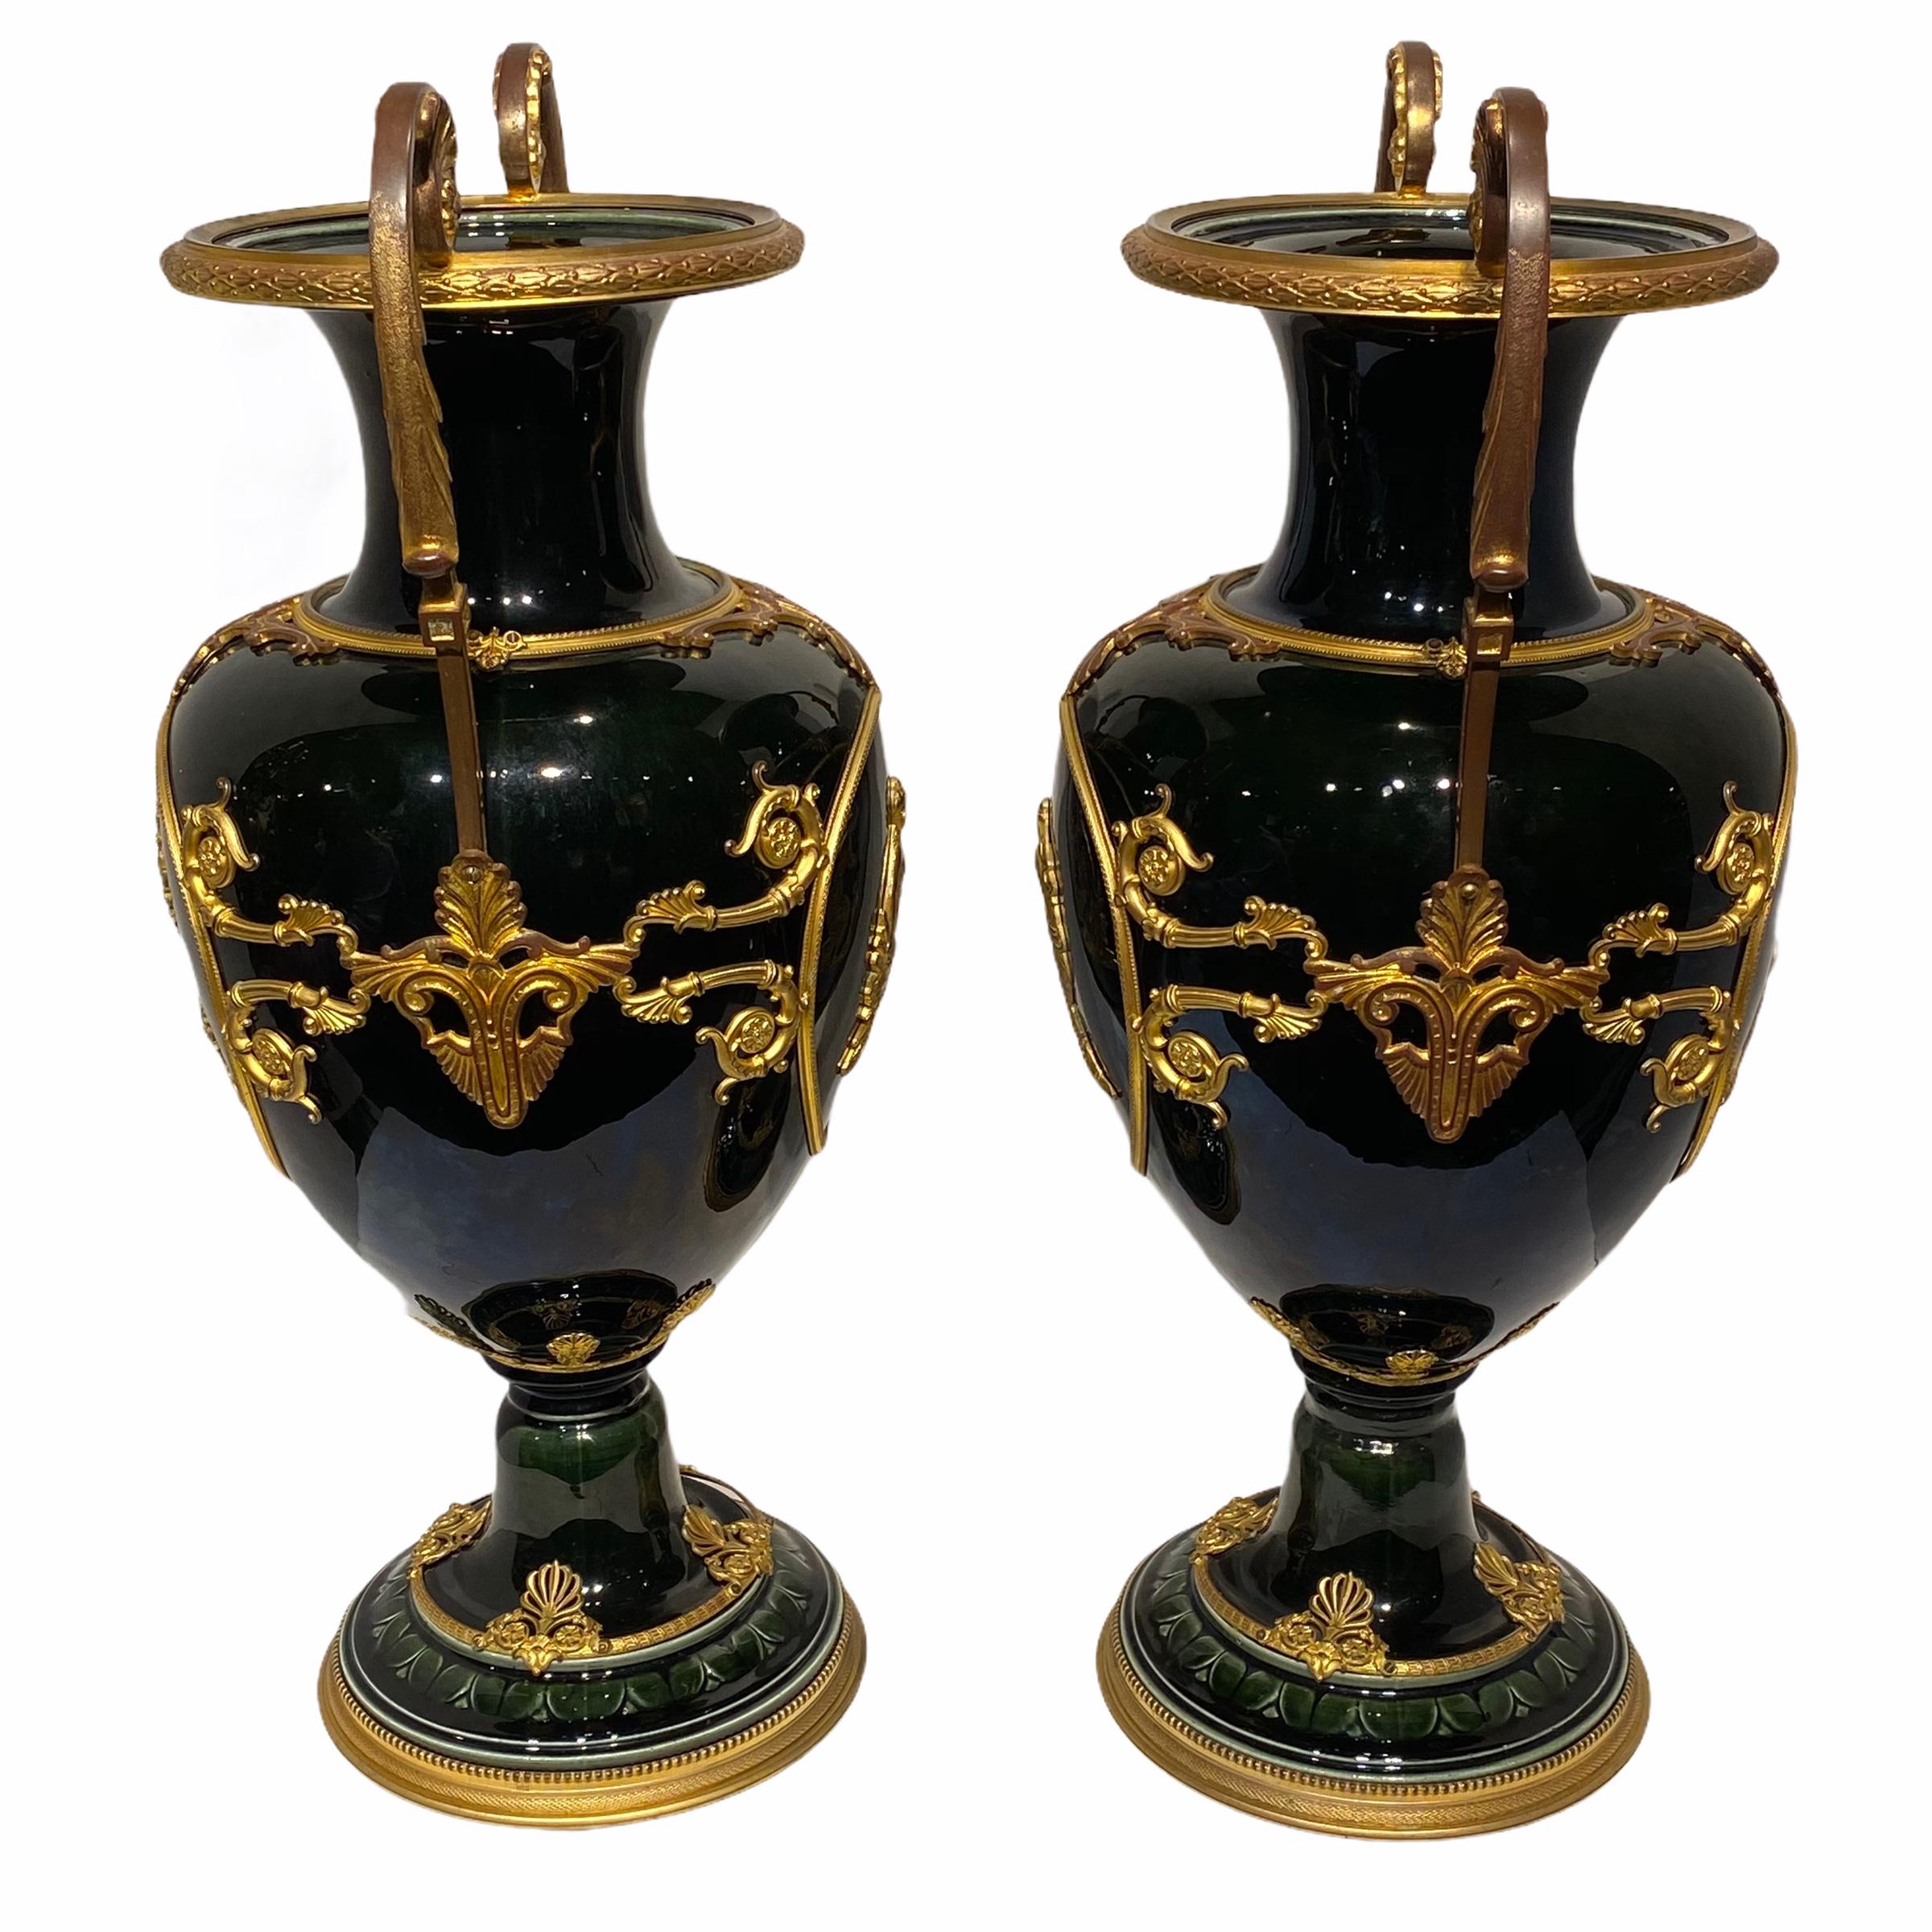 French Iridescent Glazed Faience Vases with Neoclassical Gilt Bronze Mounts For Sale